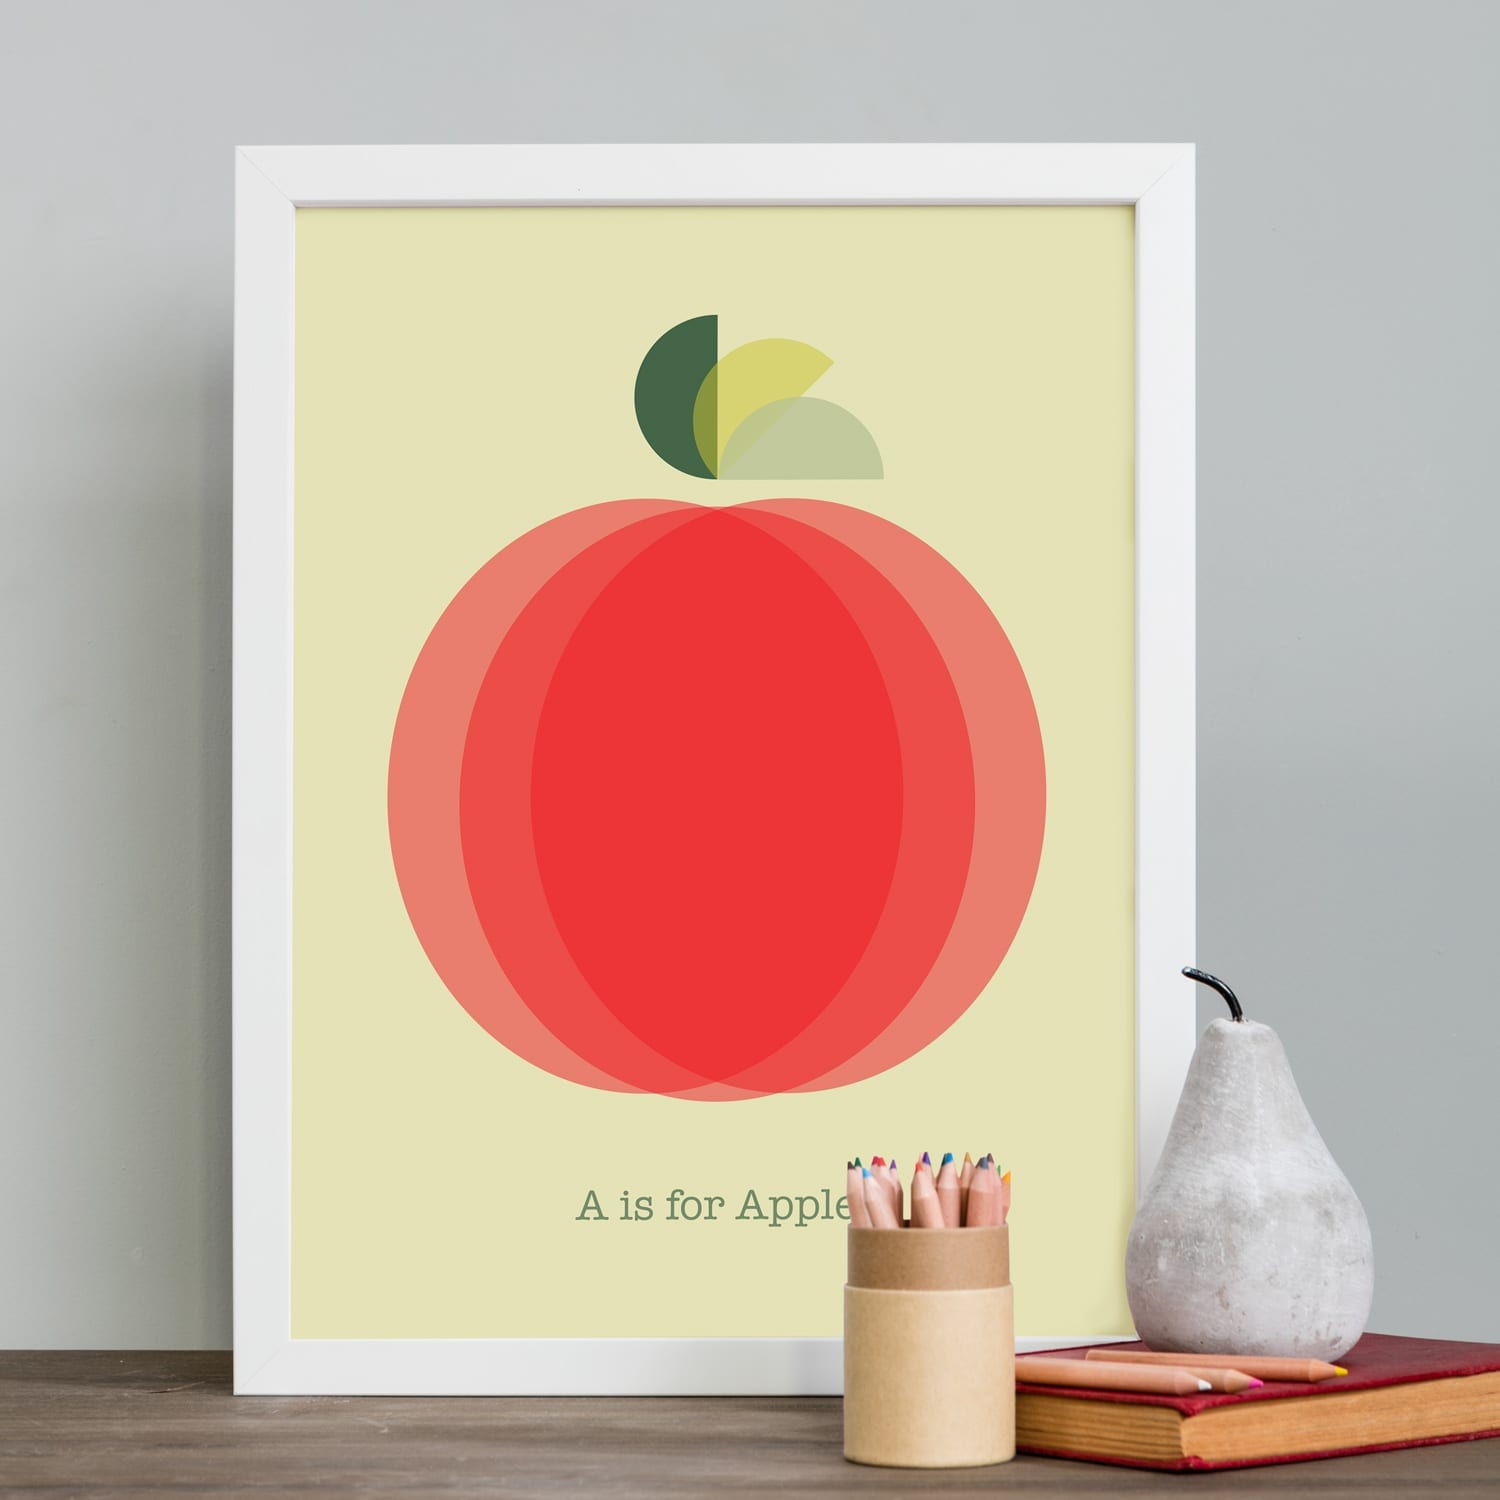 A is for Apple by Mimi & Mae